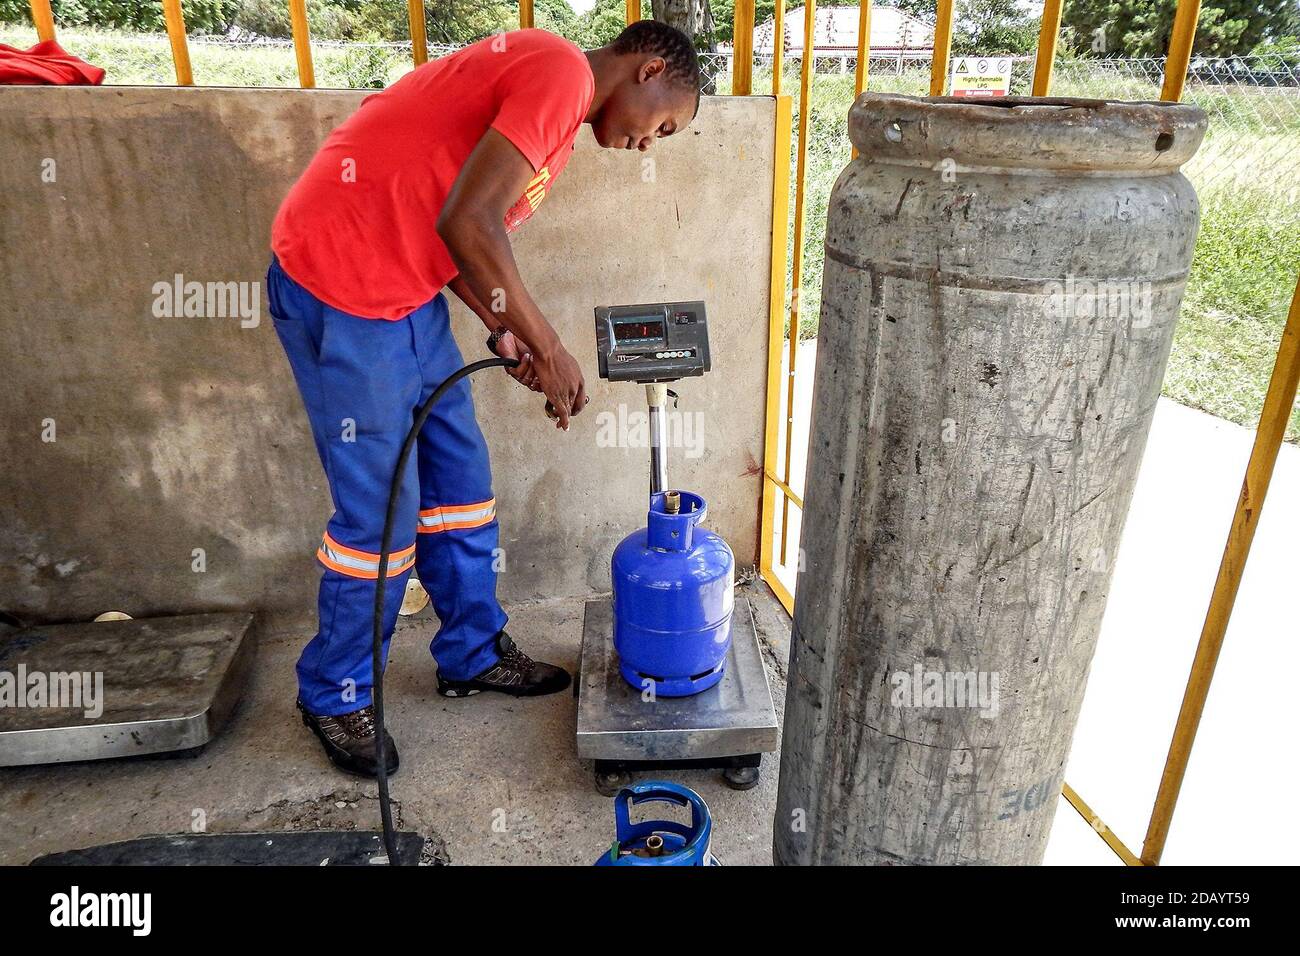 Tadiwanash Chakata, a member of the NeedEnergy delivery team, refills and weighs a gas cylinder for a client order in Bradfield, Bulawayo, Zimbabwe Stock Photo